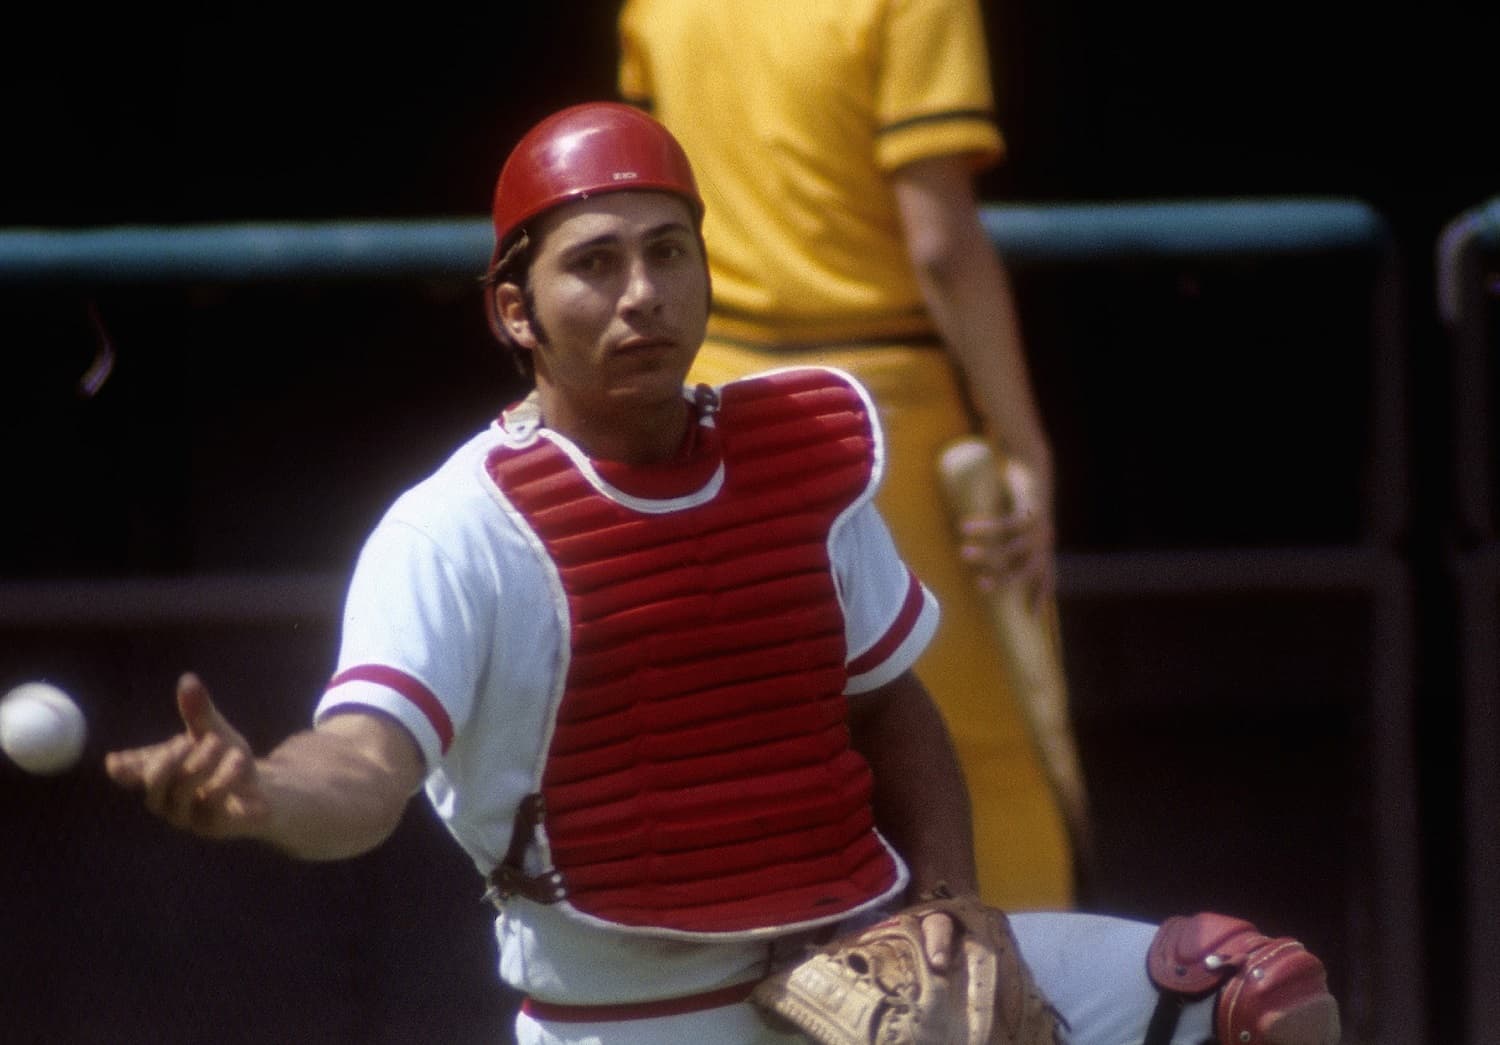 Johnny Bench Net Worth: Details About Hands, Jersey, Stats, Age